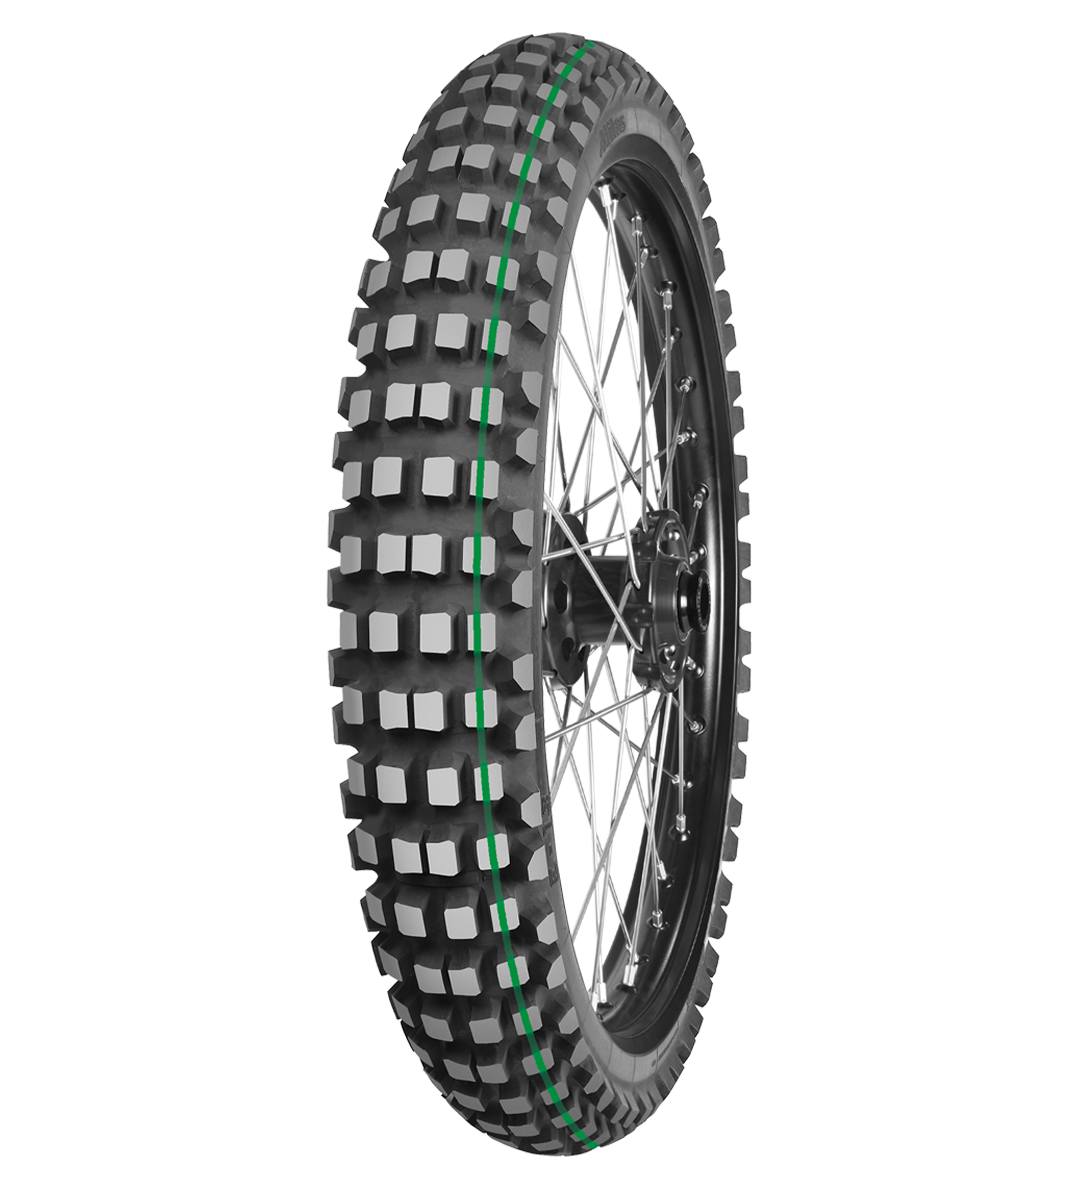 Mitas E-13 Rally Star 90/90-21 Rally Off-Road 54R Green Tube Front Tire, 224621, 90/90-21, Adventure Touring, E Series, E-13 Rally Star, Off-Road, Rally, Rear, Tires - Imported and distributed in North & South America by Lindeco Genuine Powersports - Premier Powersports Equipment and Accessories for Motorcycle Enthusiasts, Professional Riders and Dealers.